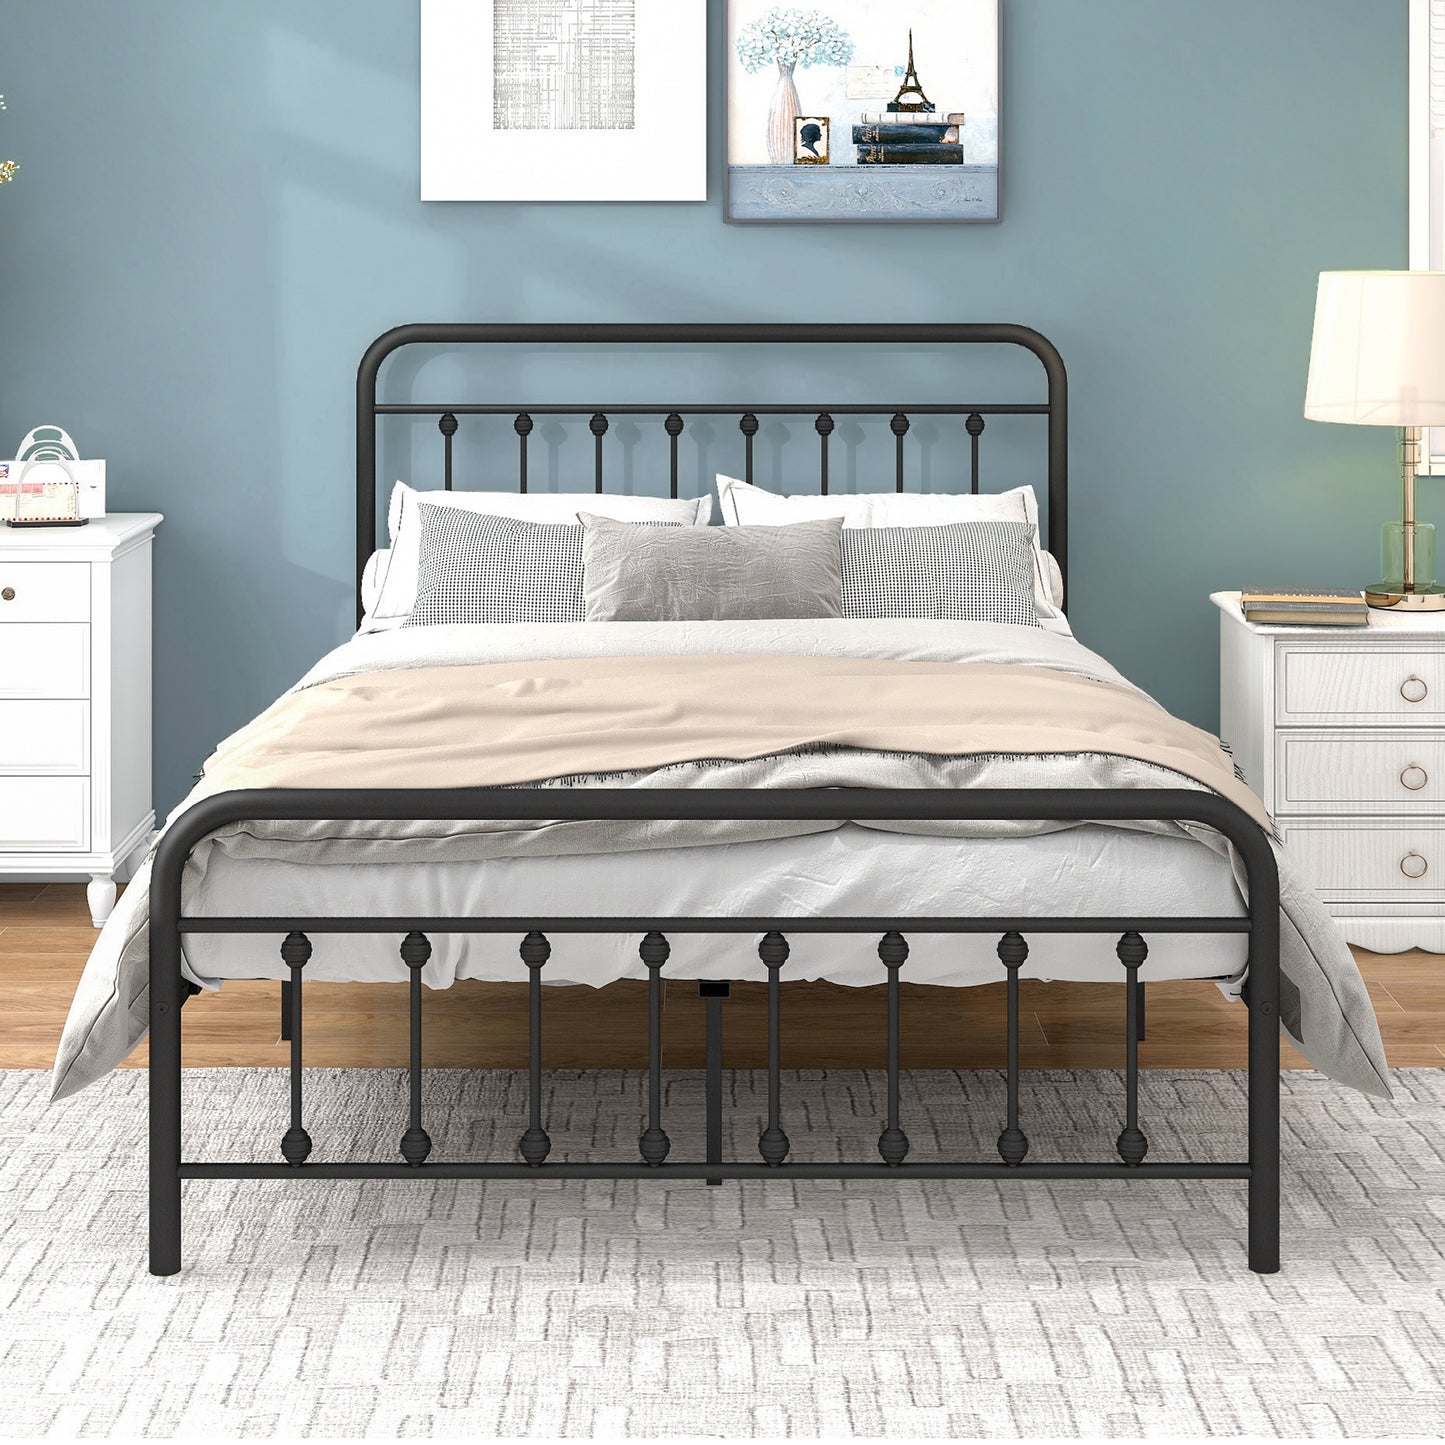 Black Iron Platform Bed Frame Full Size with Headboard and Footboard, New Upgrade Metal Legs Design, Metal Twin Bed Frame Mattress Foundation with Strong Slat Support